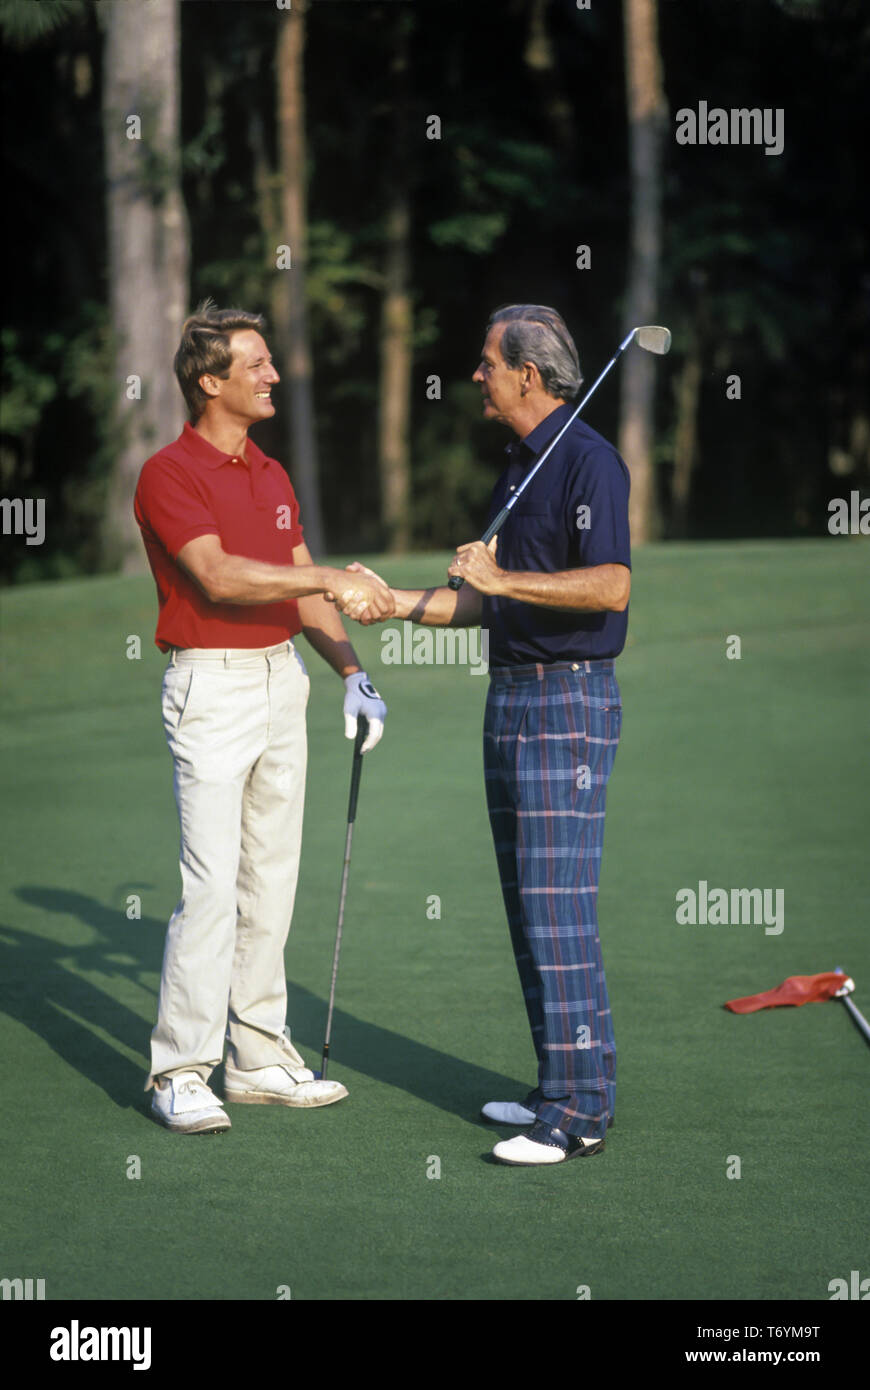 1990 HISTORICAL MEN ON SOUTHERN UNITED STATES GOLF COURSE HANDSHAKE Stock Photo